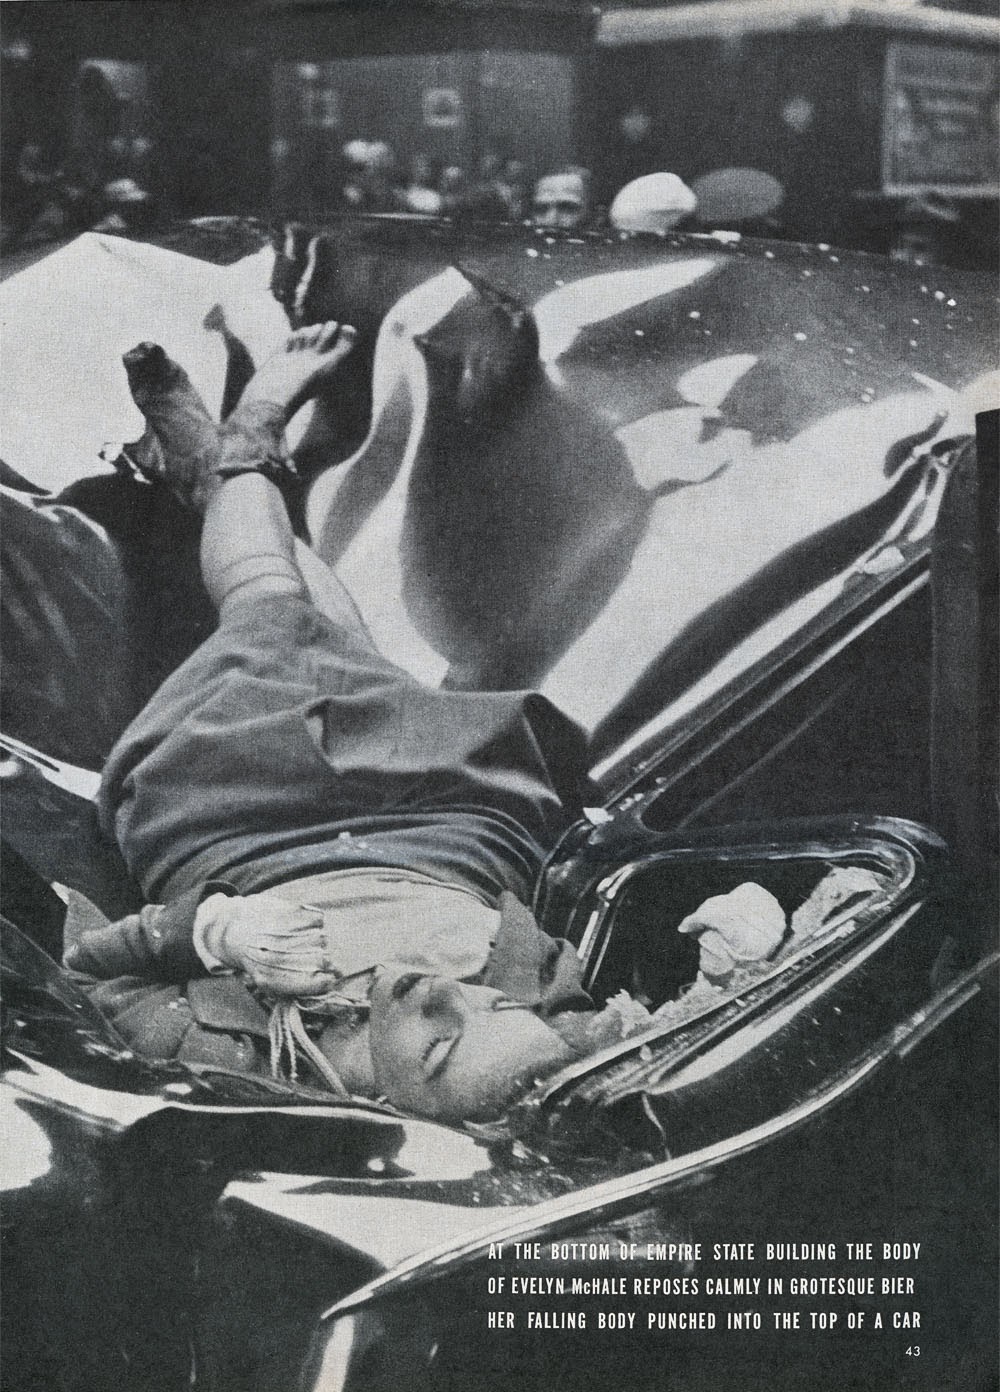 The Most Beautiful Suicide - Evelyn McHale leapt to her death from the Empire State Building, ...jpg